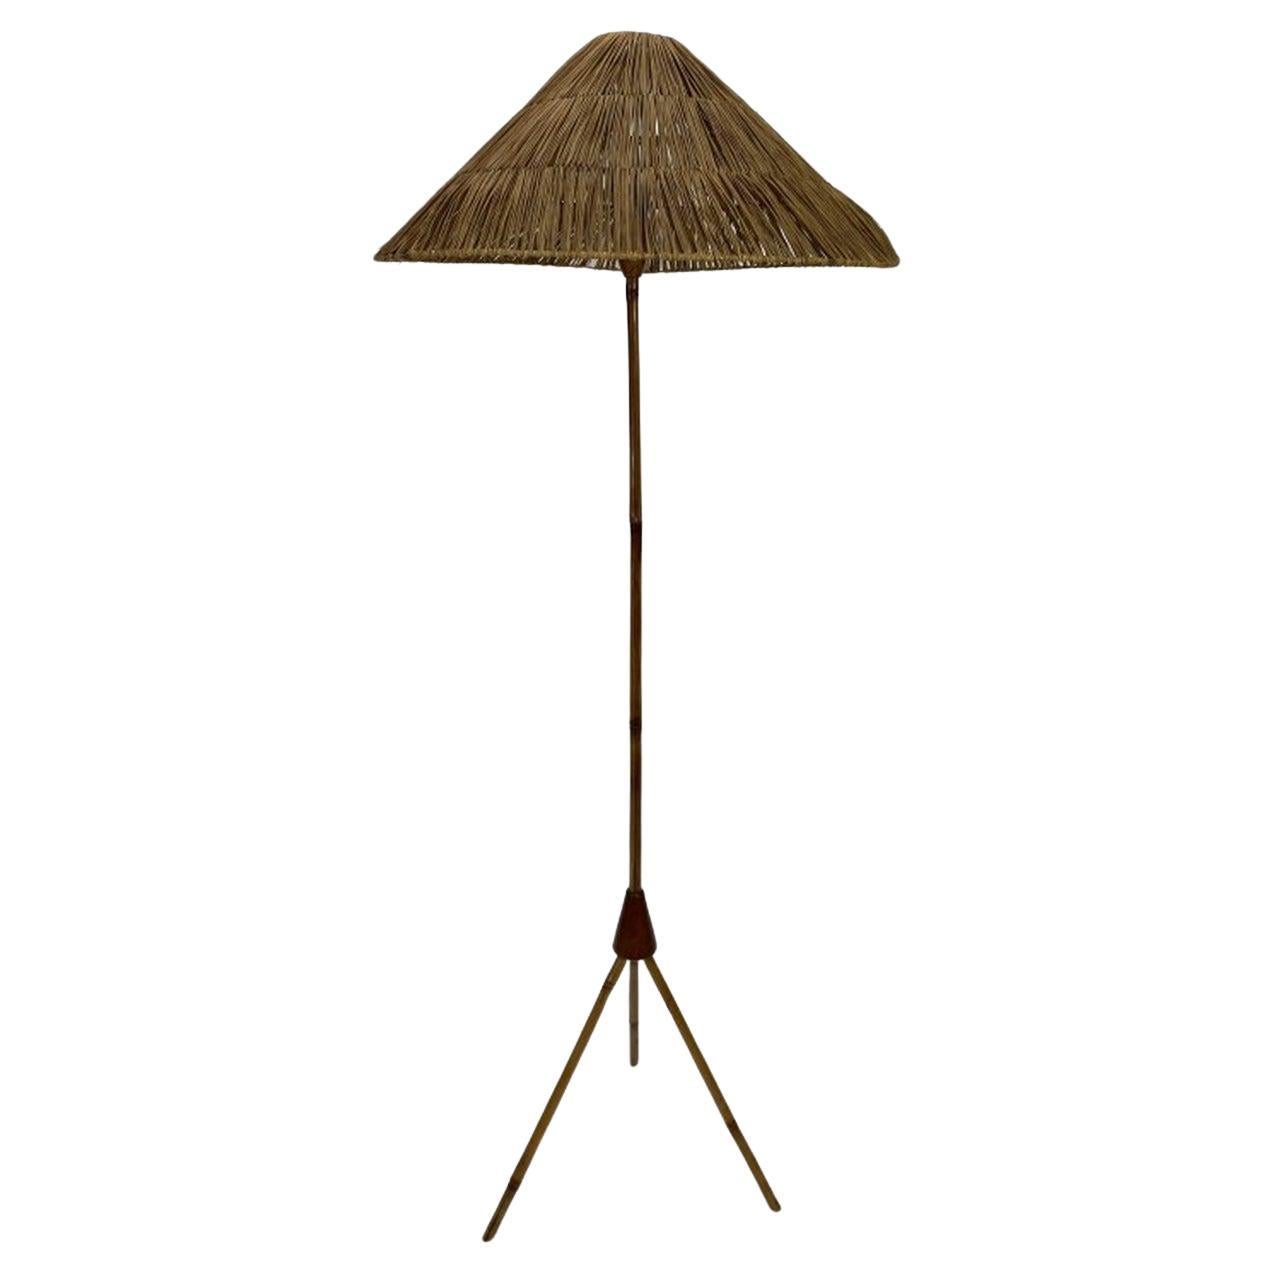 Bamboo Floor Lamp by Jozef Frank